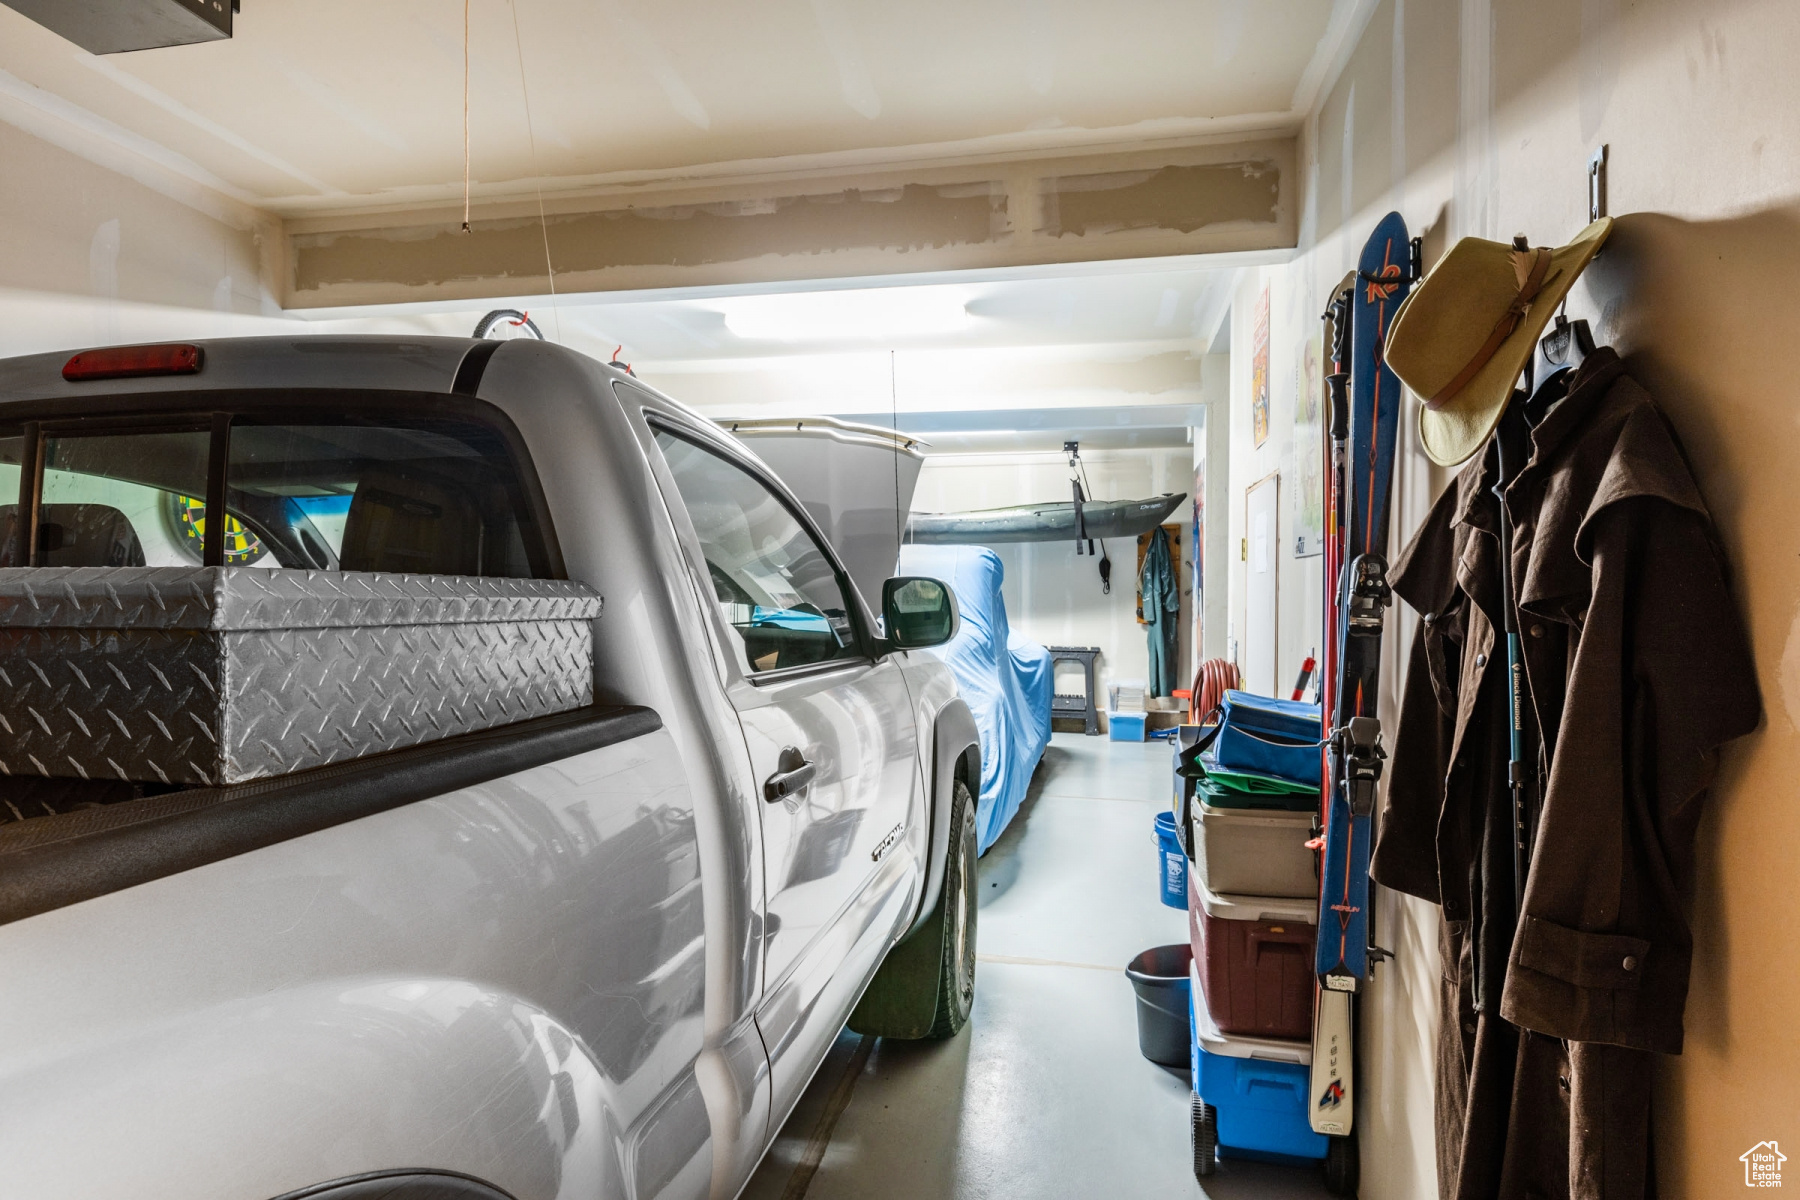 Tandem garage has PLENTY of space for full sized vehicles!